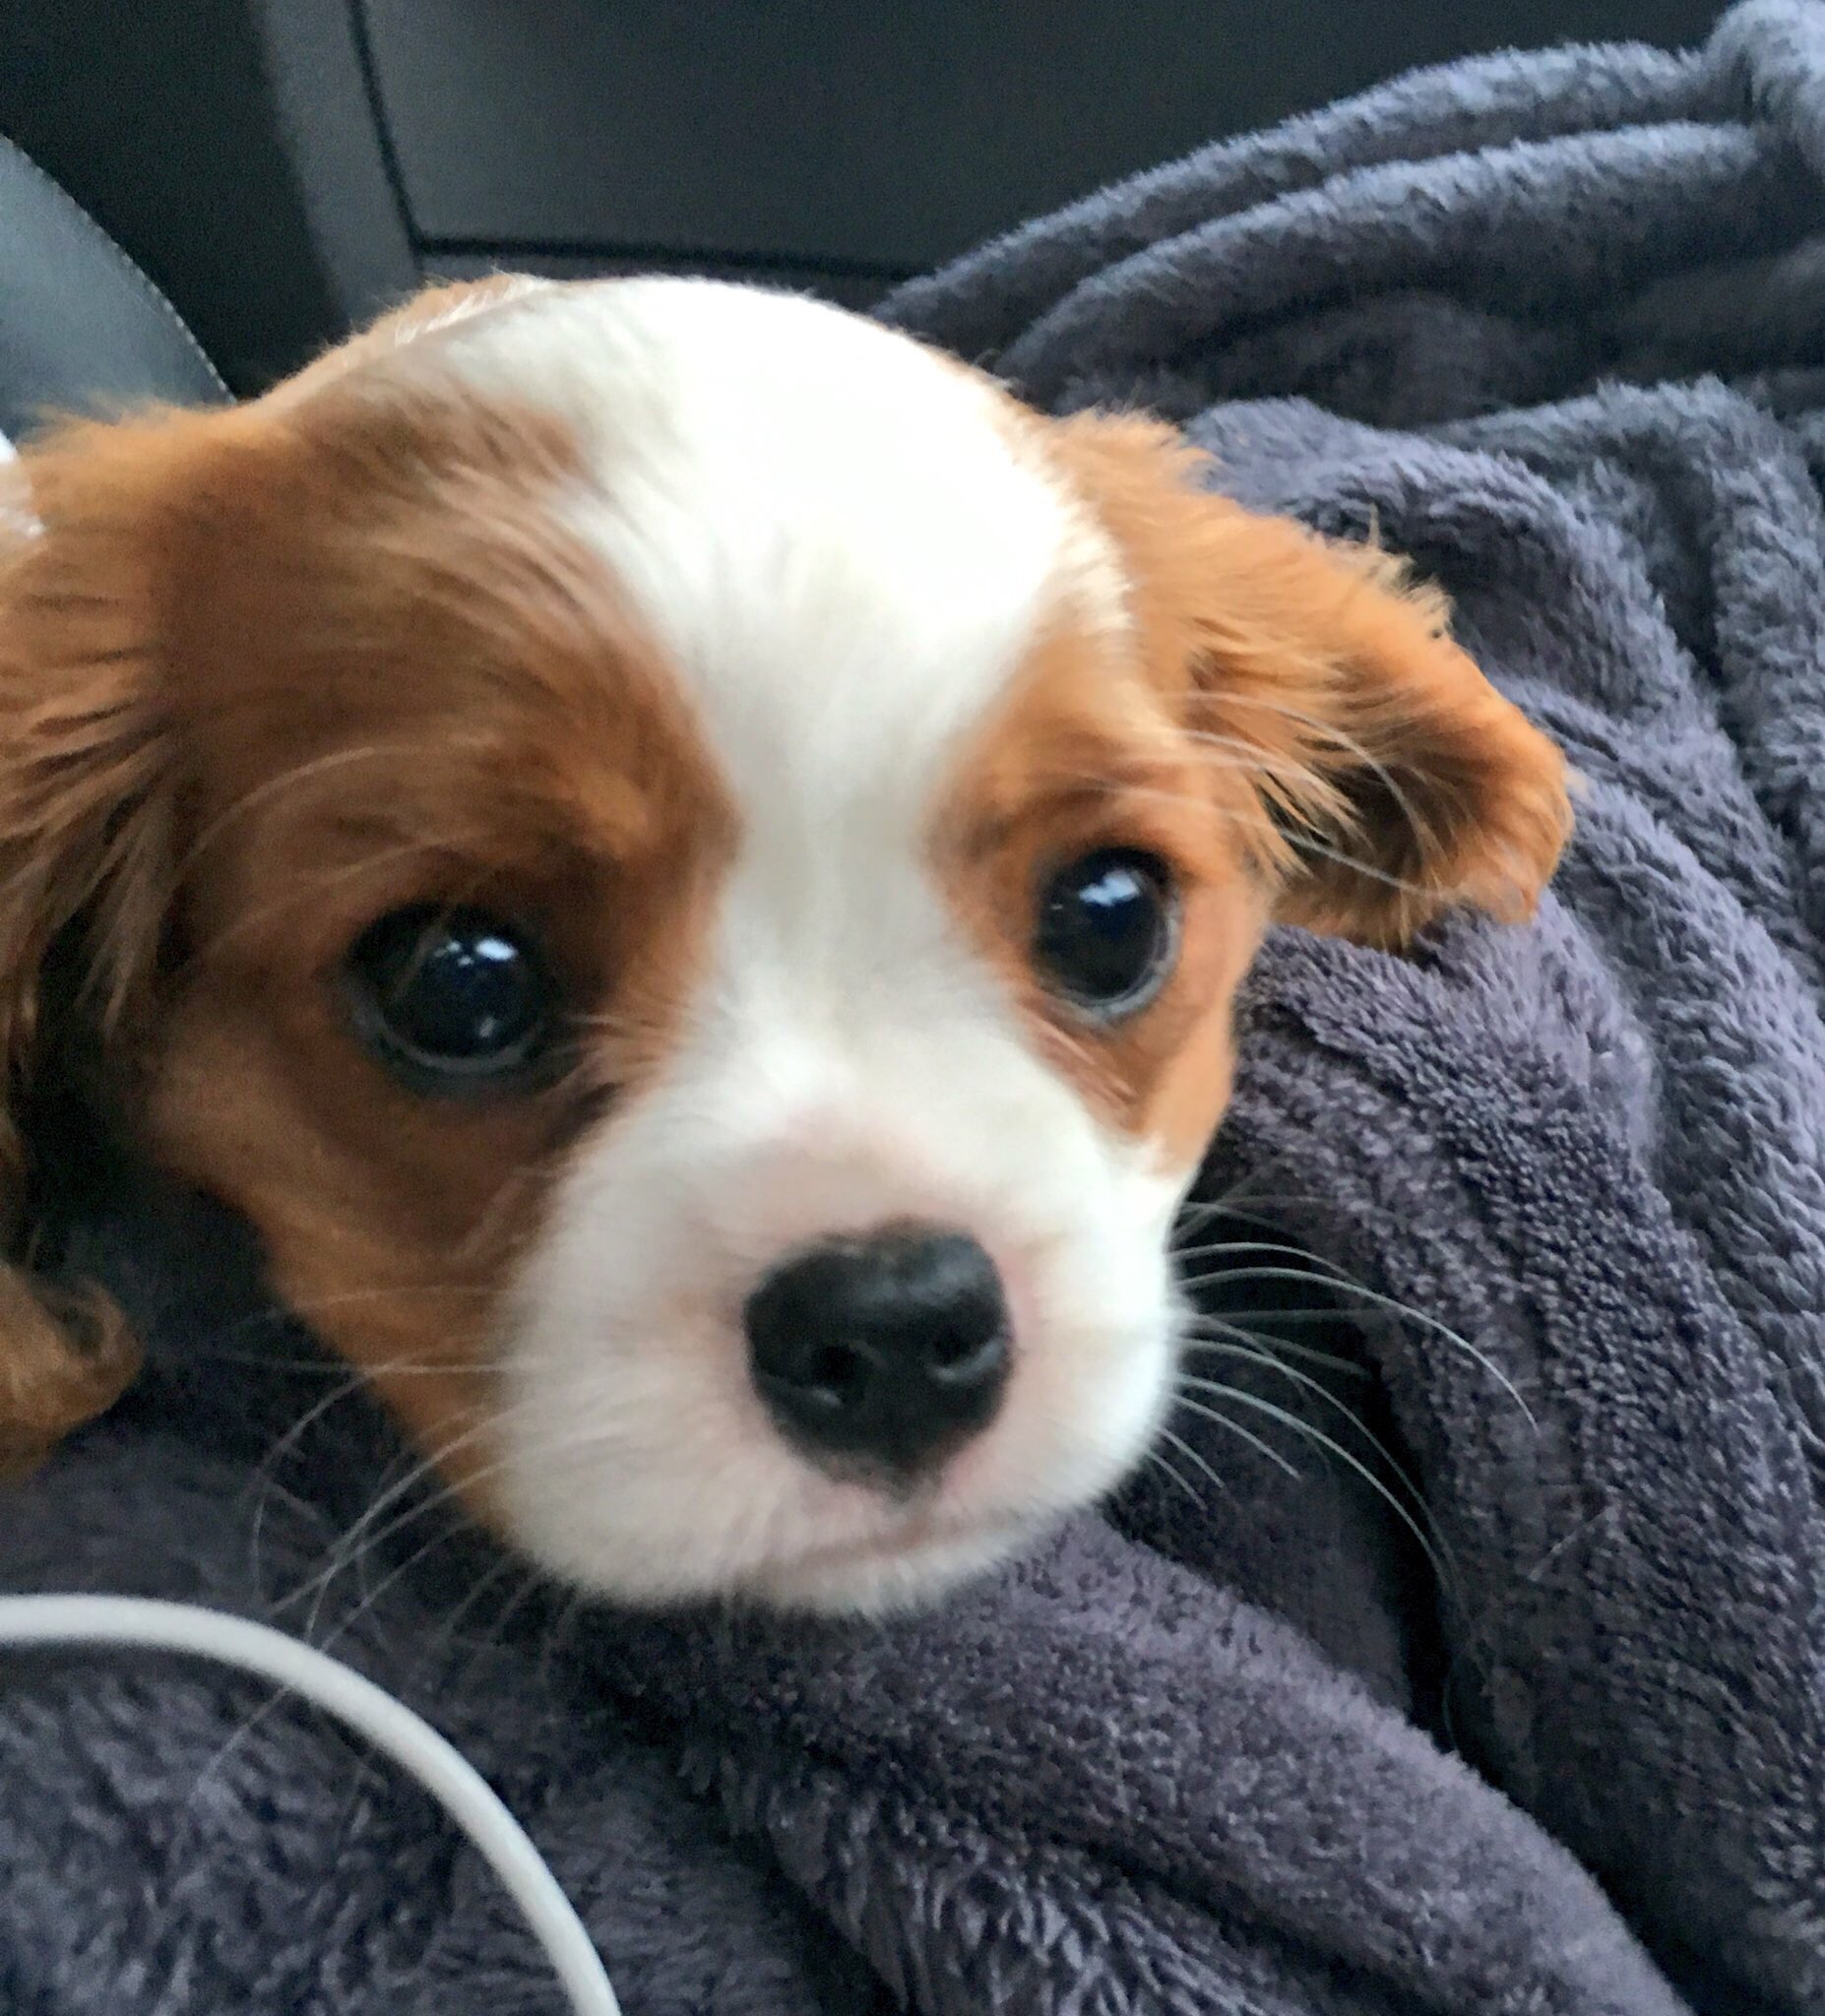 Ali-A on Twitter: "EEVEE'S COMING HOME - AHHH!